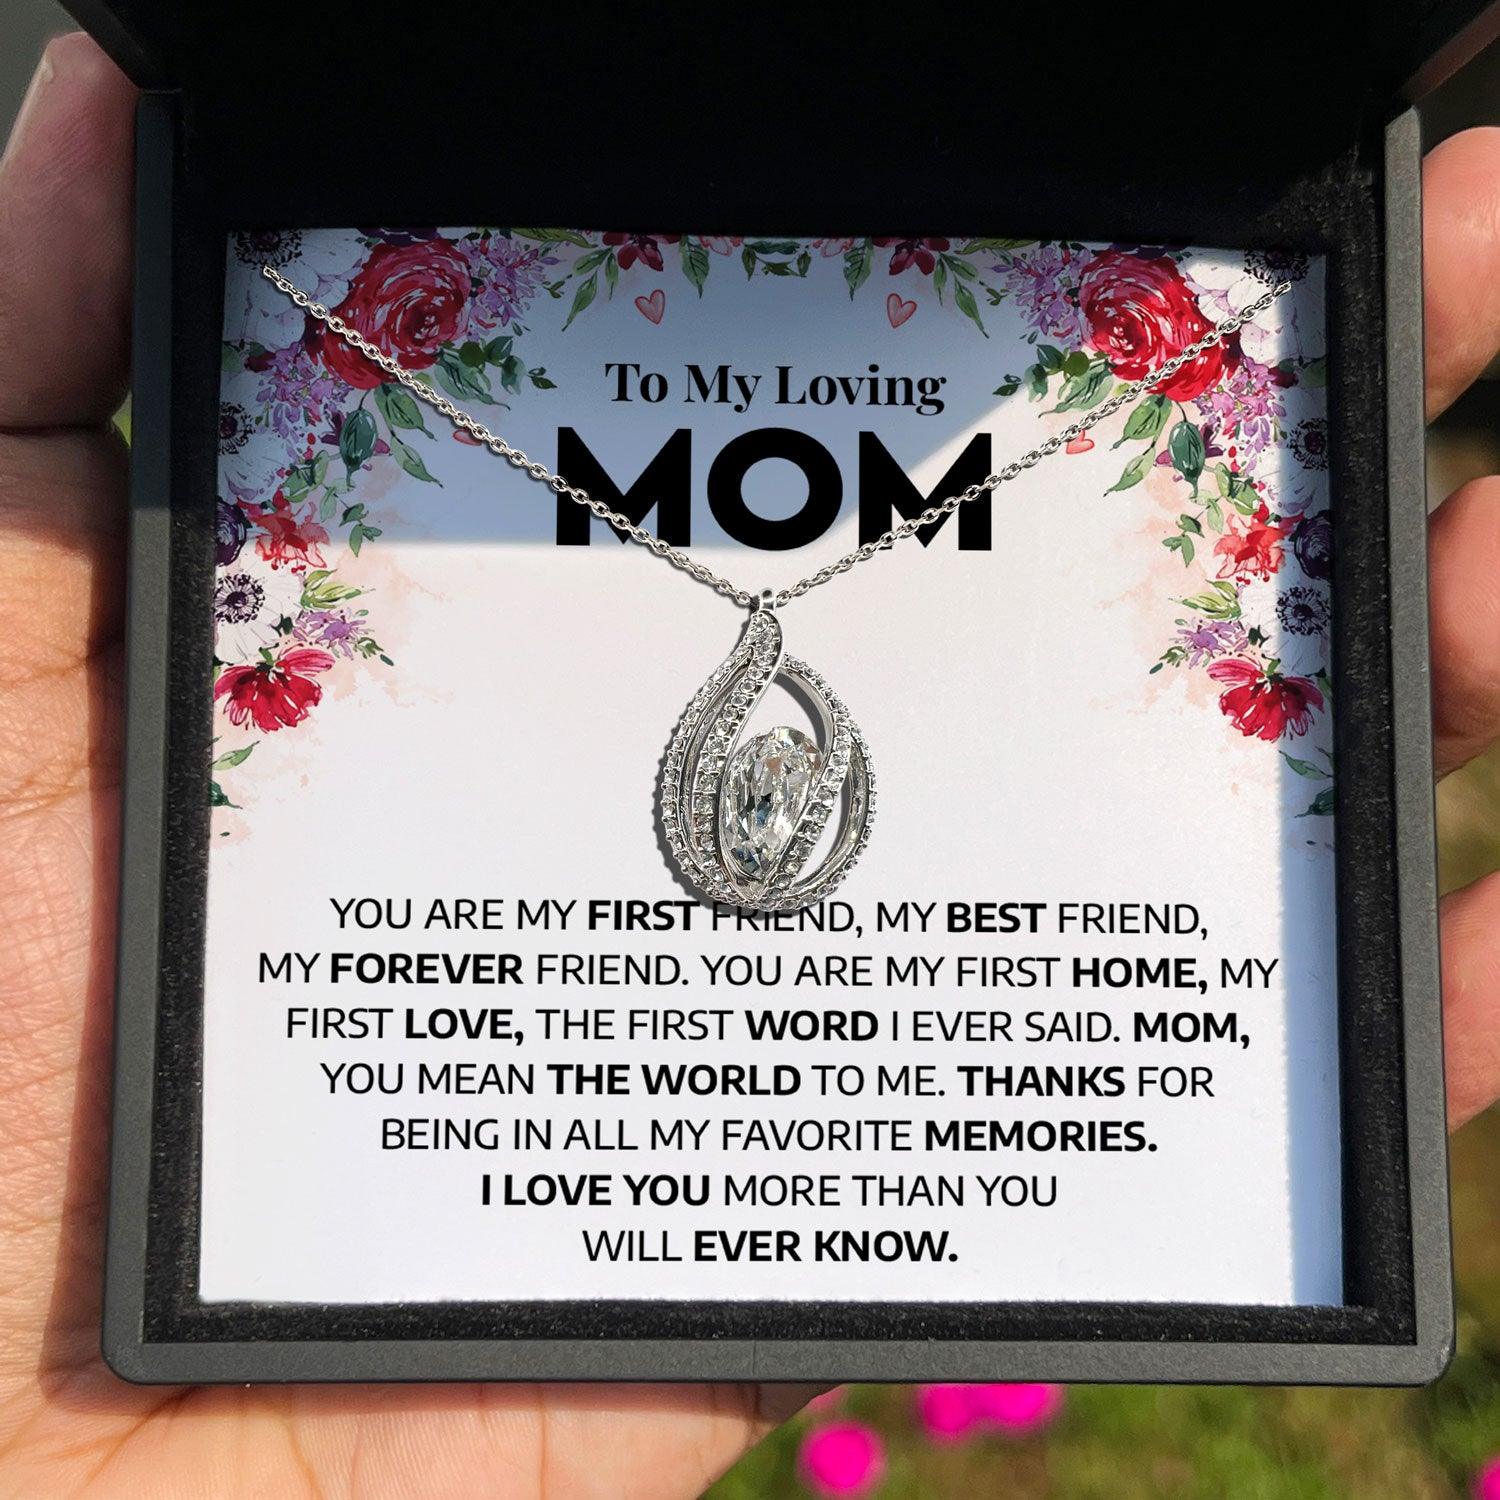 To My Loving Mom - You Are My First Friend, My Best Friend, My Forever Friend - Orbital Birdcage Necklace - TRYNDI